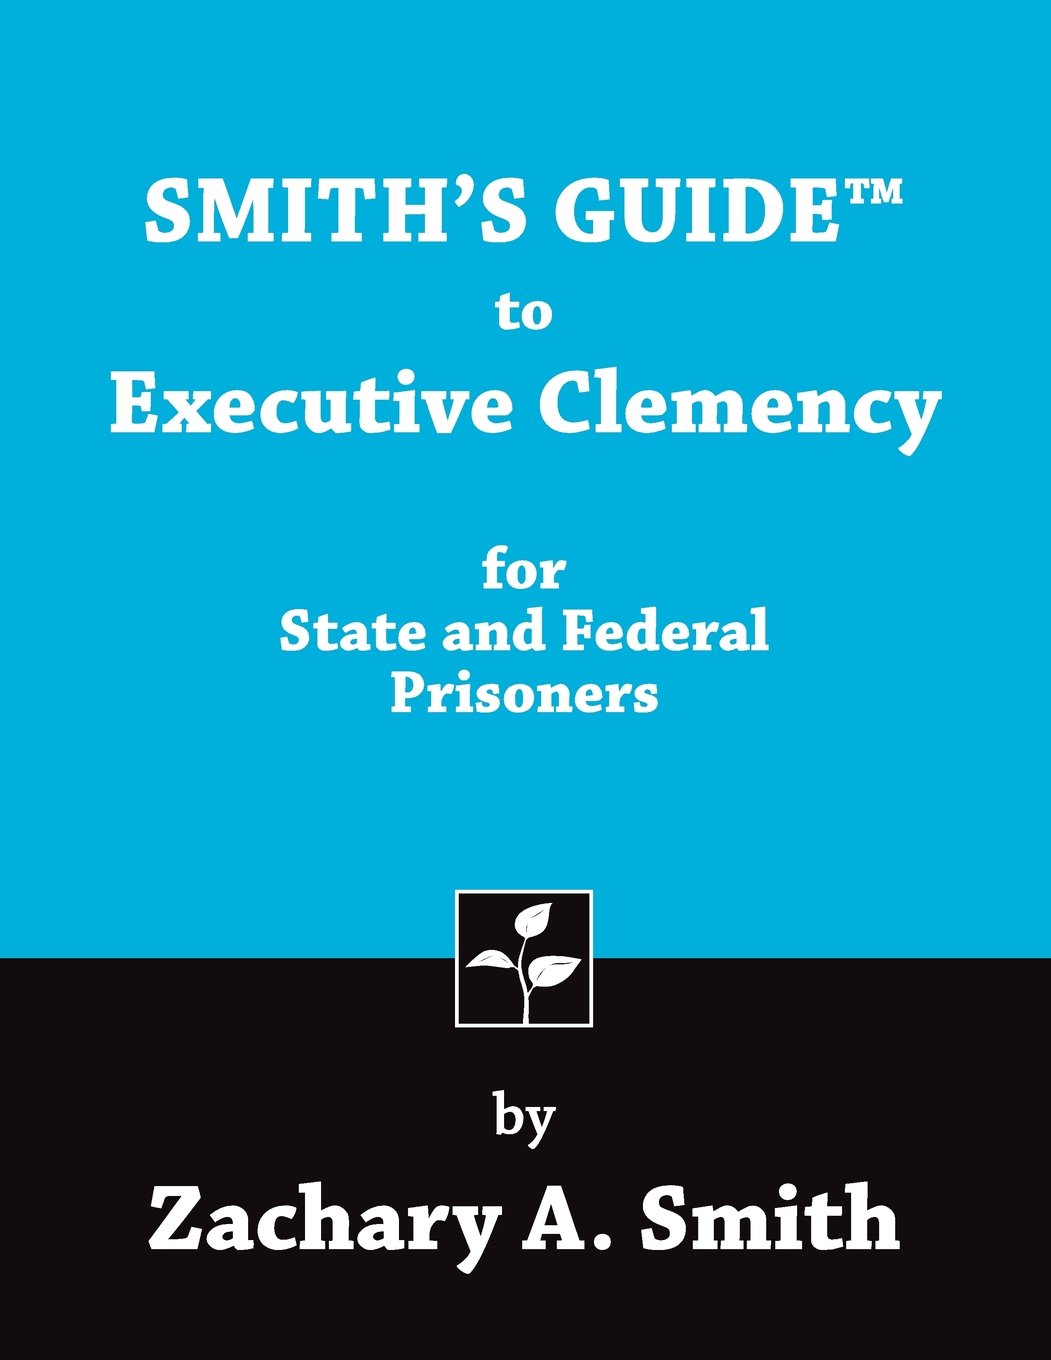 Smith's Guide to Executive Clemency for State and Federal Prison - SureShot Books Publishing LLC